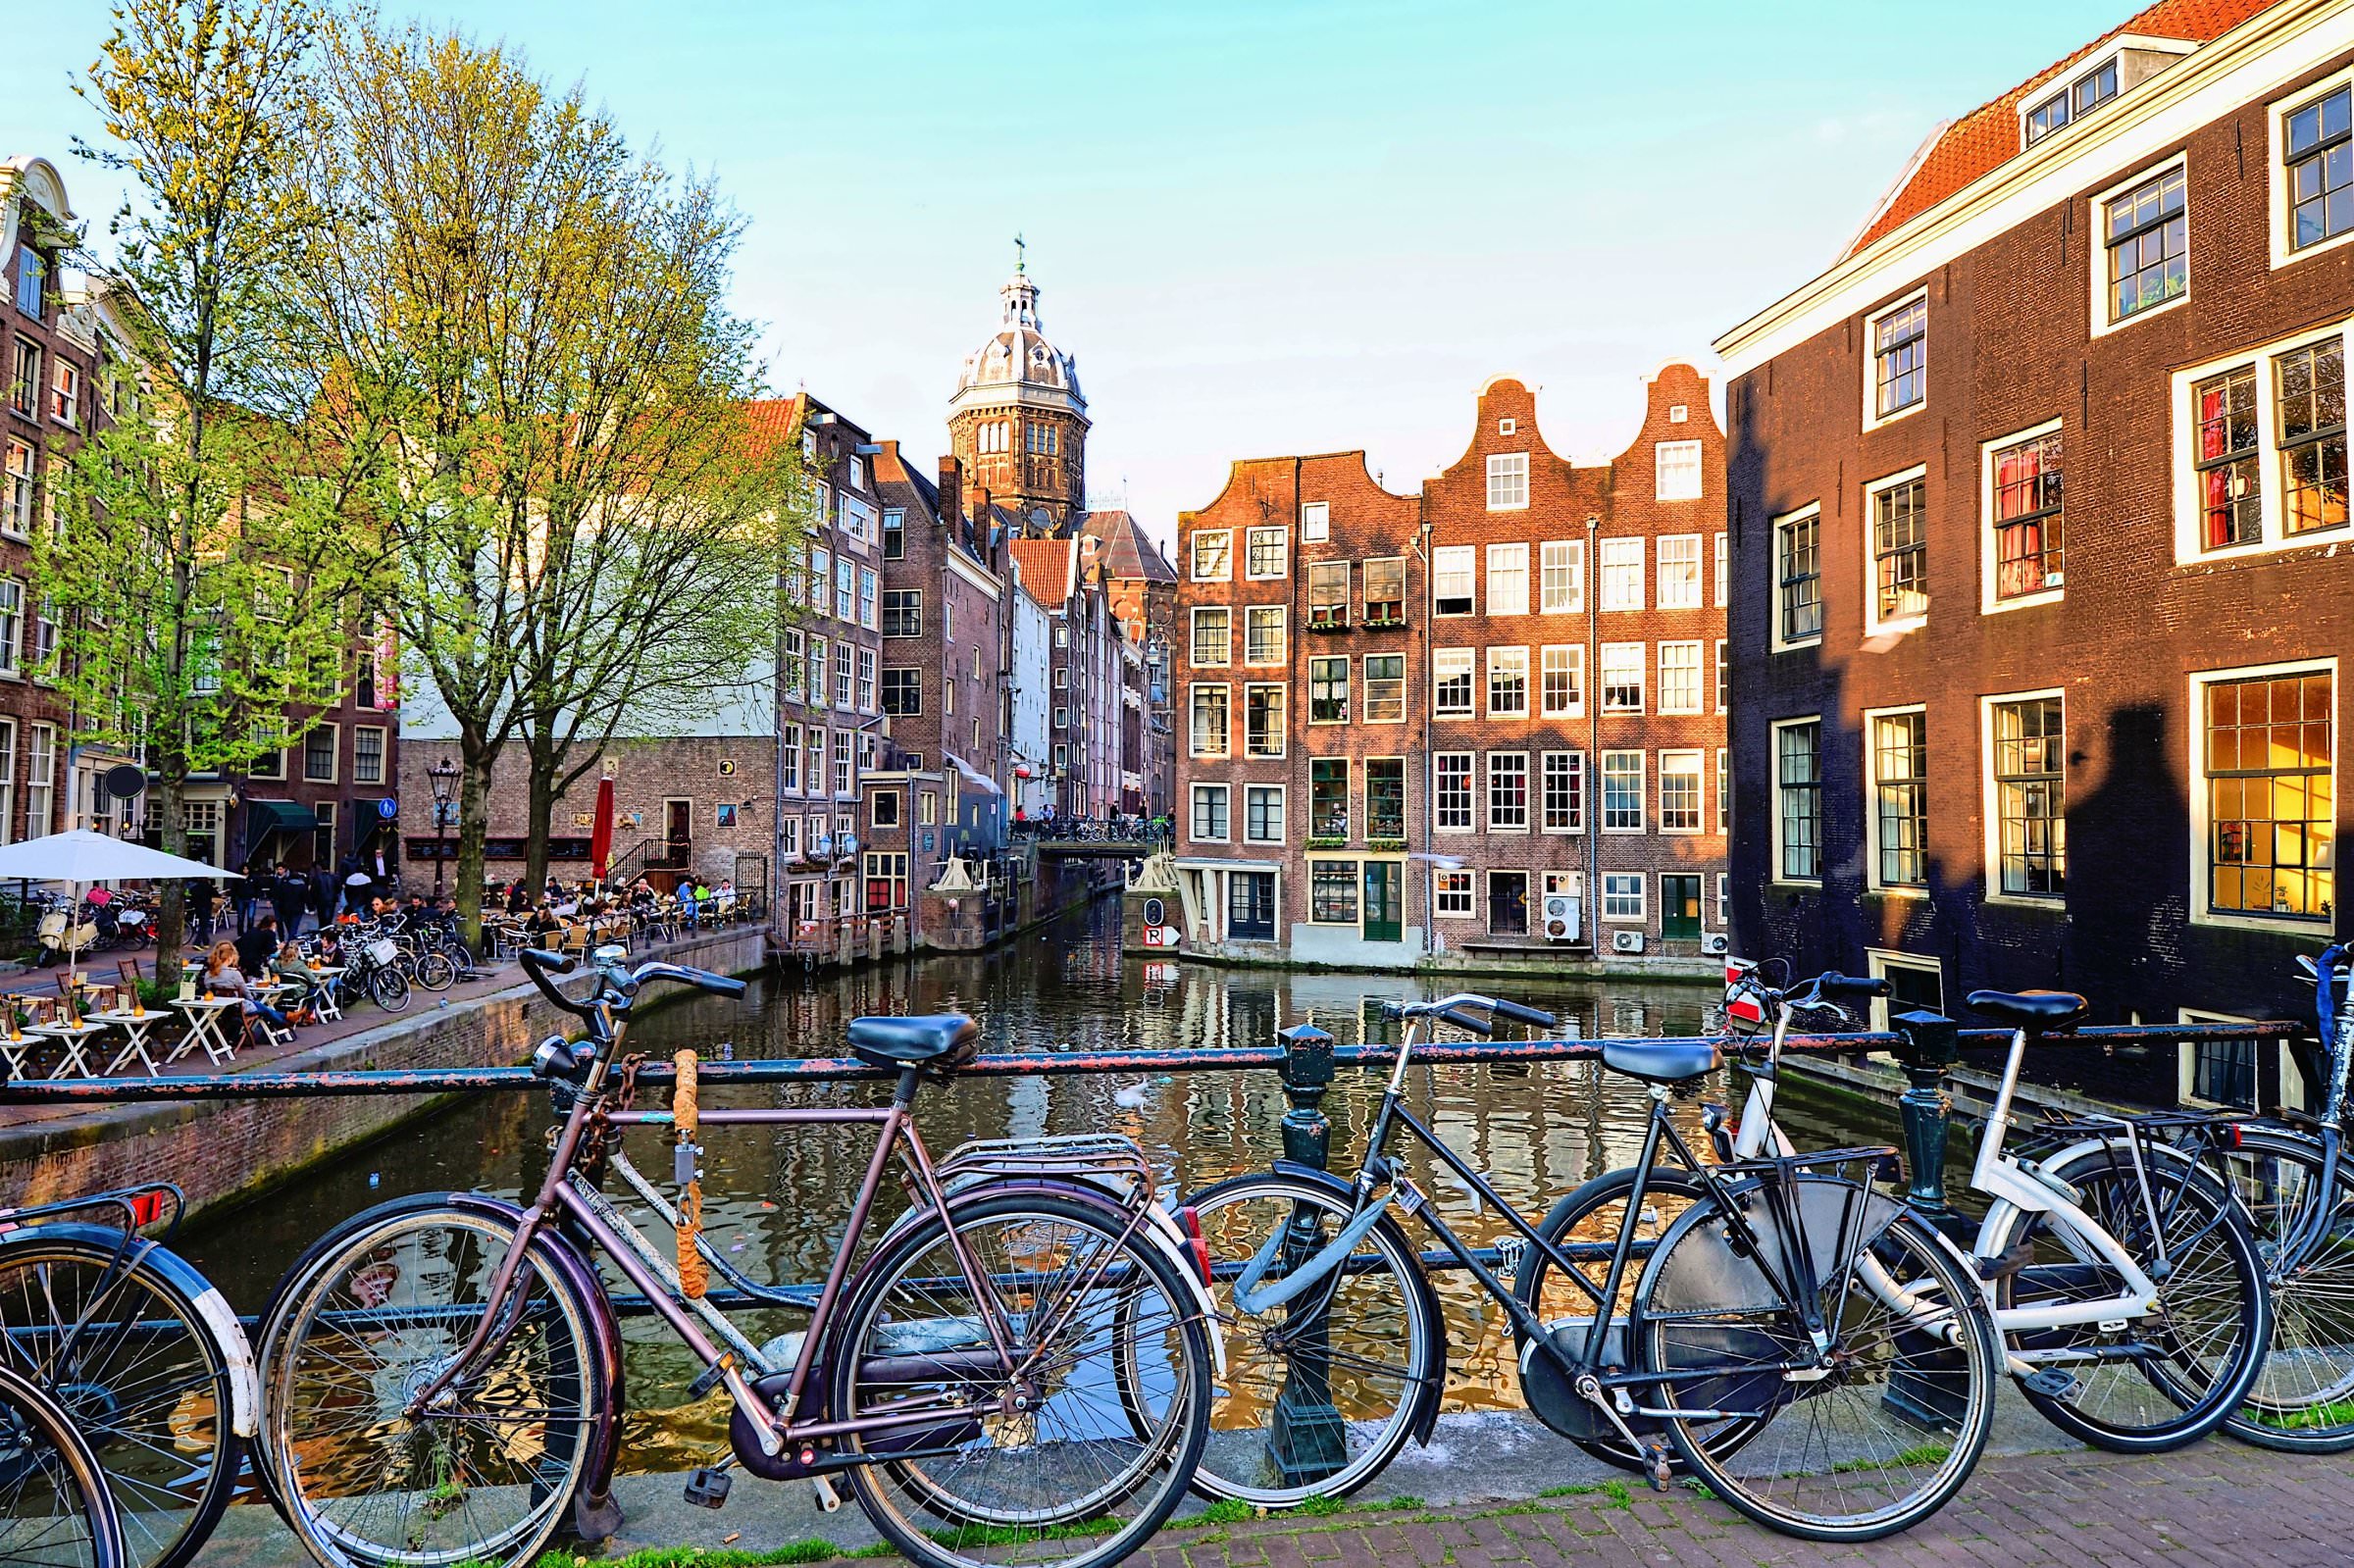 Luxury Redefined 11 night 12 day itinerary to Amsterdam, Haarlem, Rotterdam and Groningen